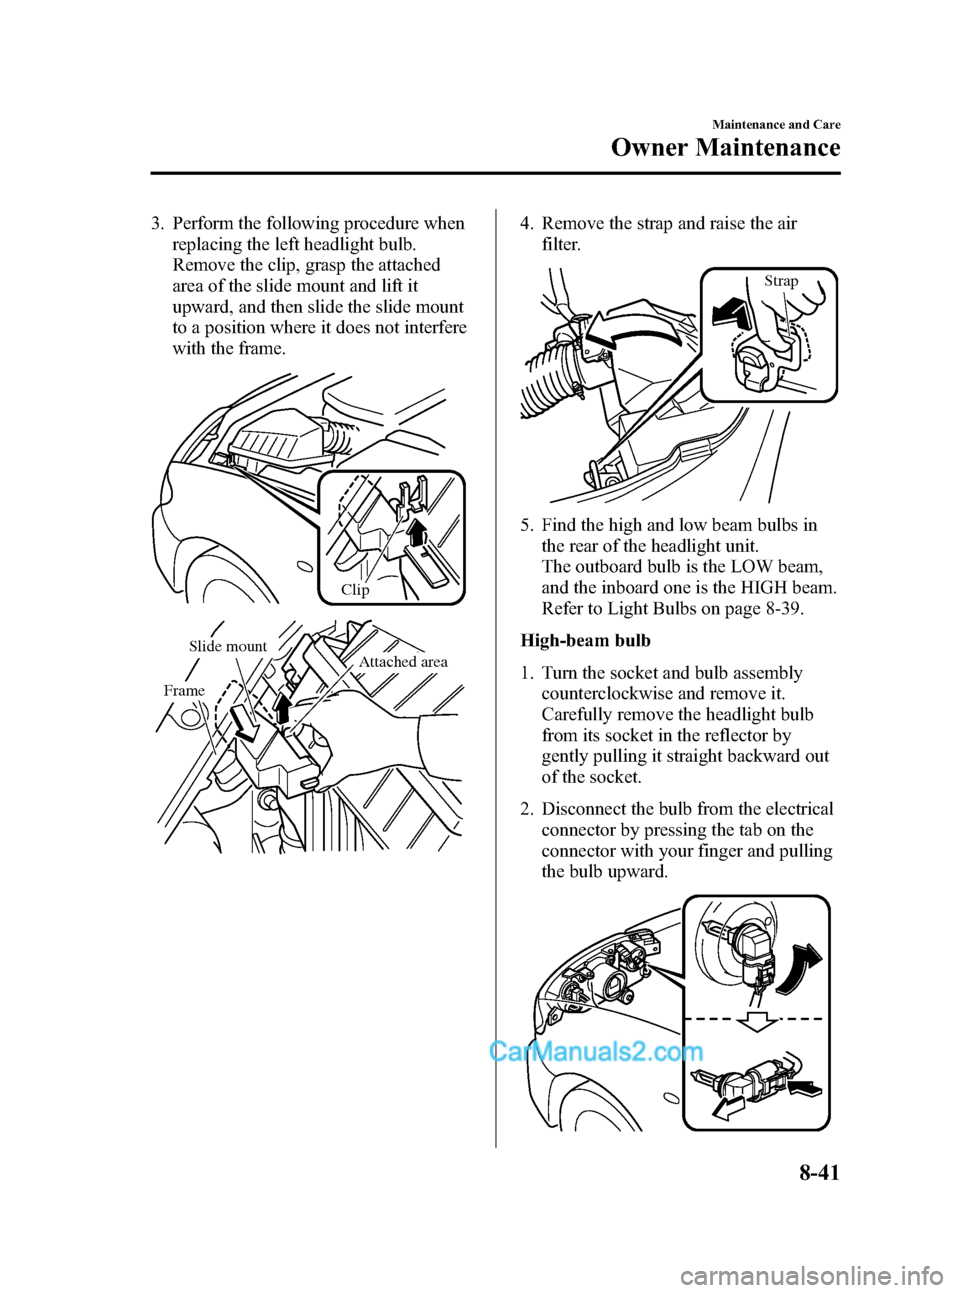 MAZDA MODEL MAZDASPEED 3 2008  Owners Manual (in English) Black plate (309,1)
3. Perform the following procedure when
replacing the left headlight bulb.
Remove the clip, grasp the attached
area of the slide mount and lift it
upward, and then slide the slide 